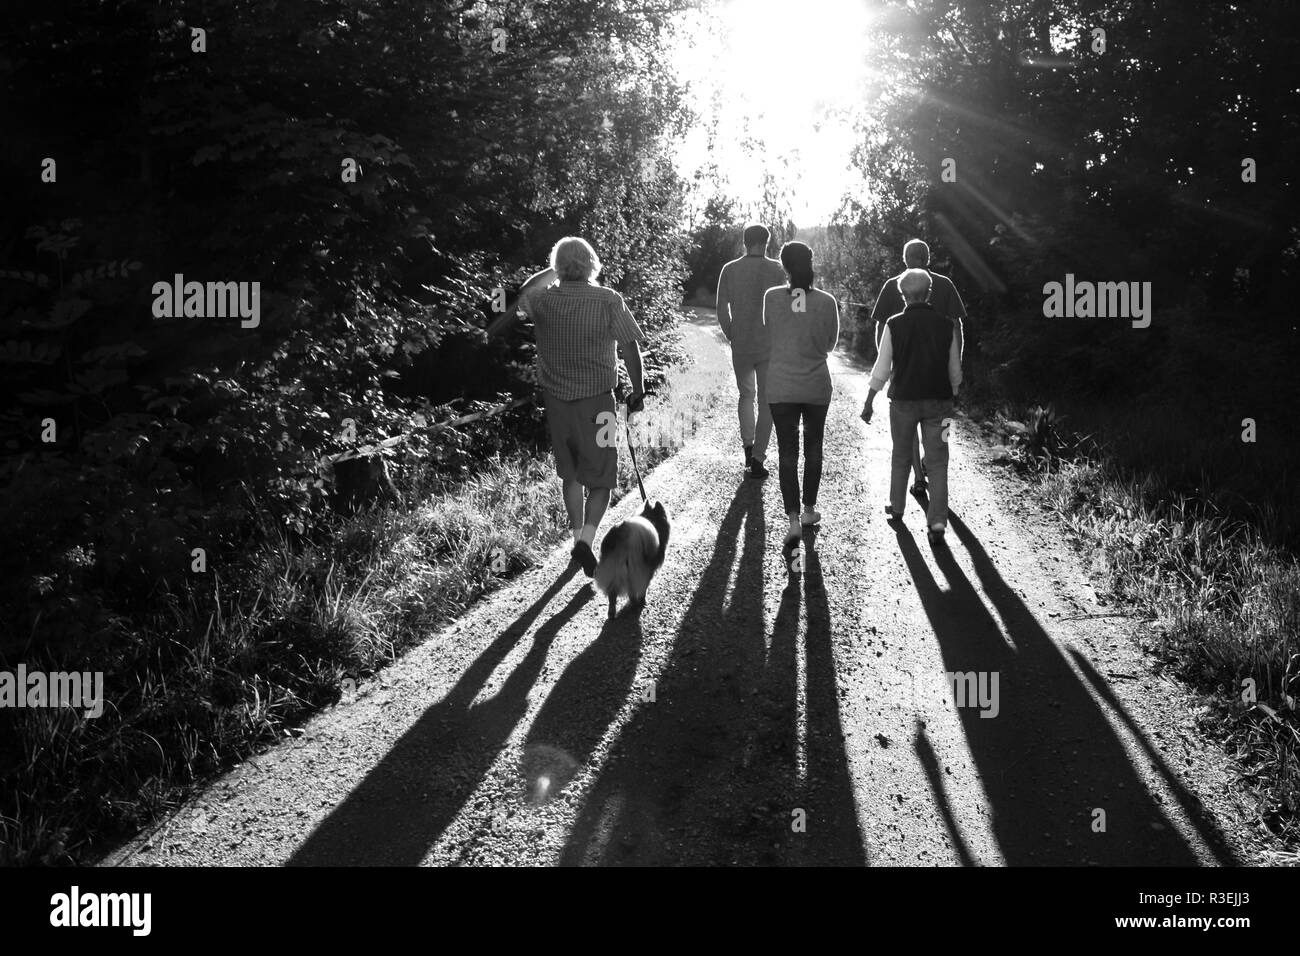 Five people and a dog walking on a gravel road in rural Dalsland, Sweden with harsh backlight Stock Photo